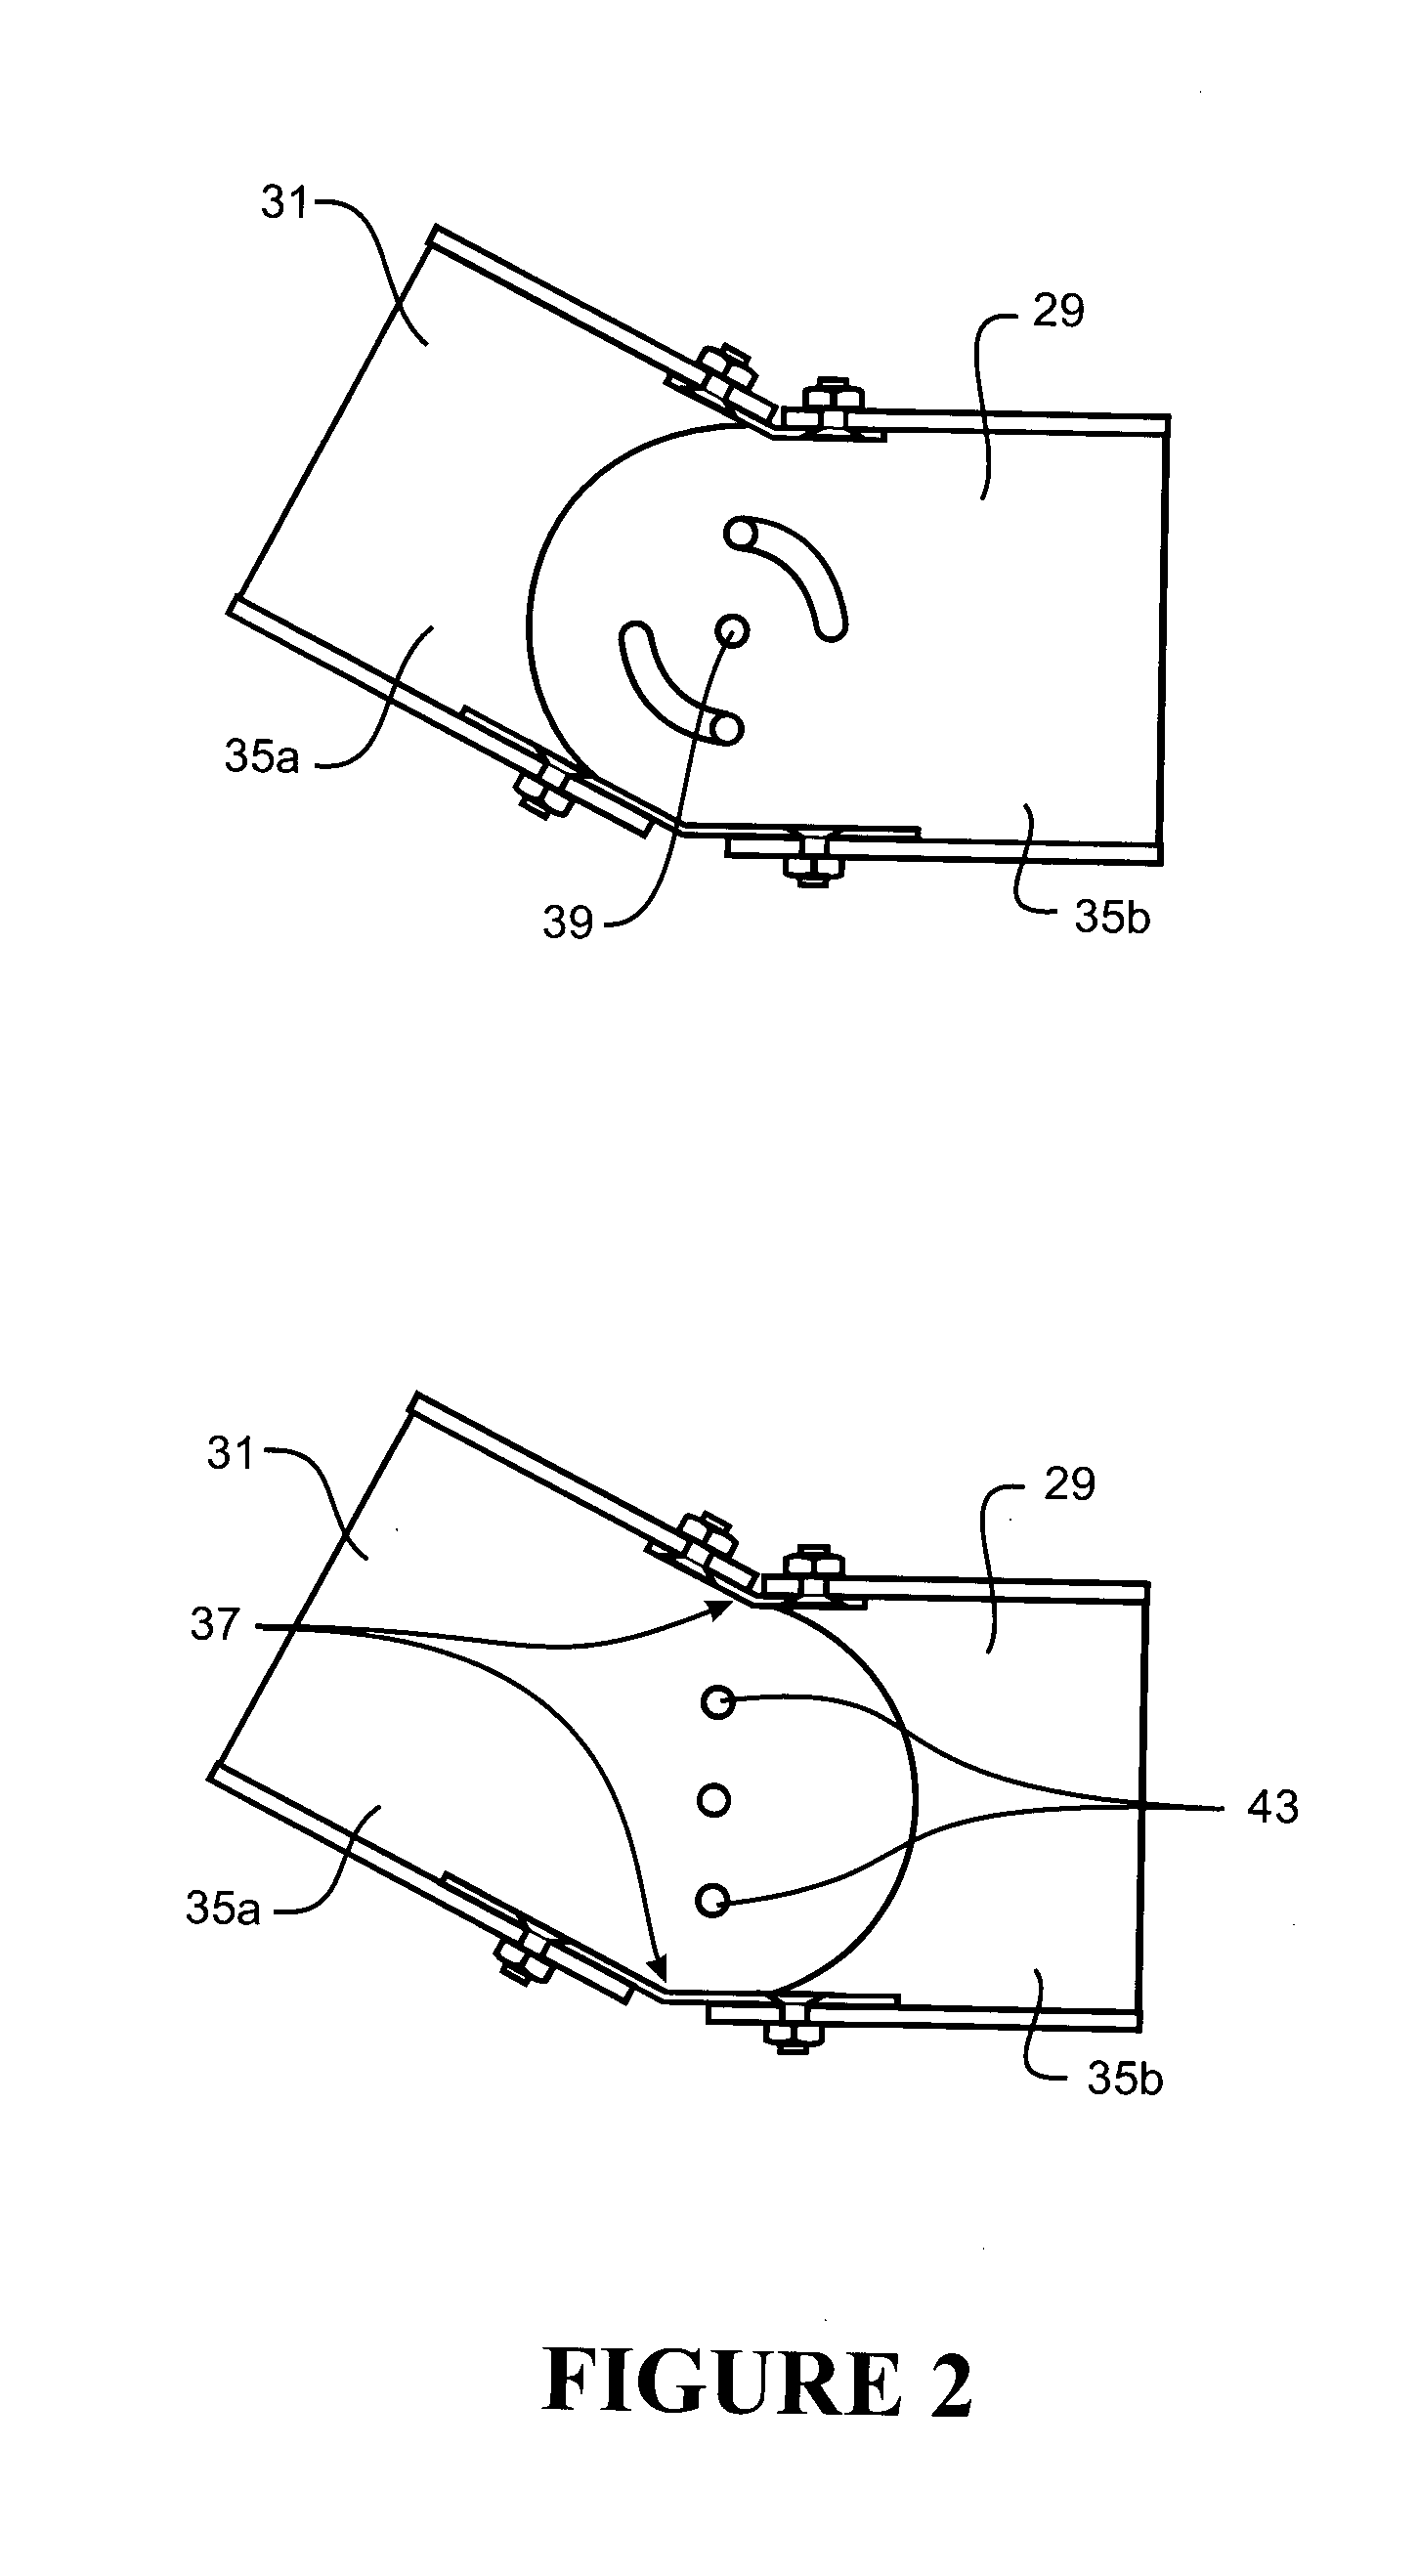 Apparatus and method for processing biomass